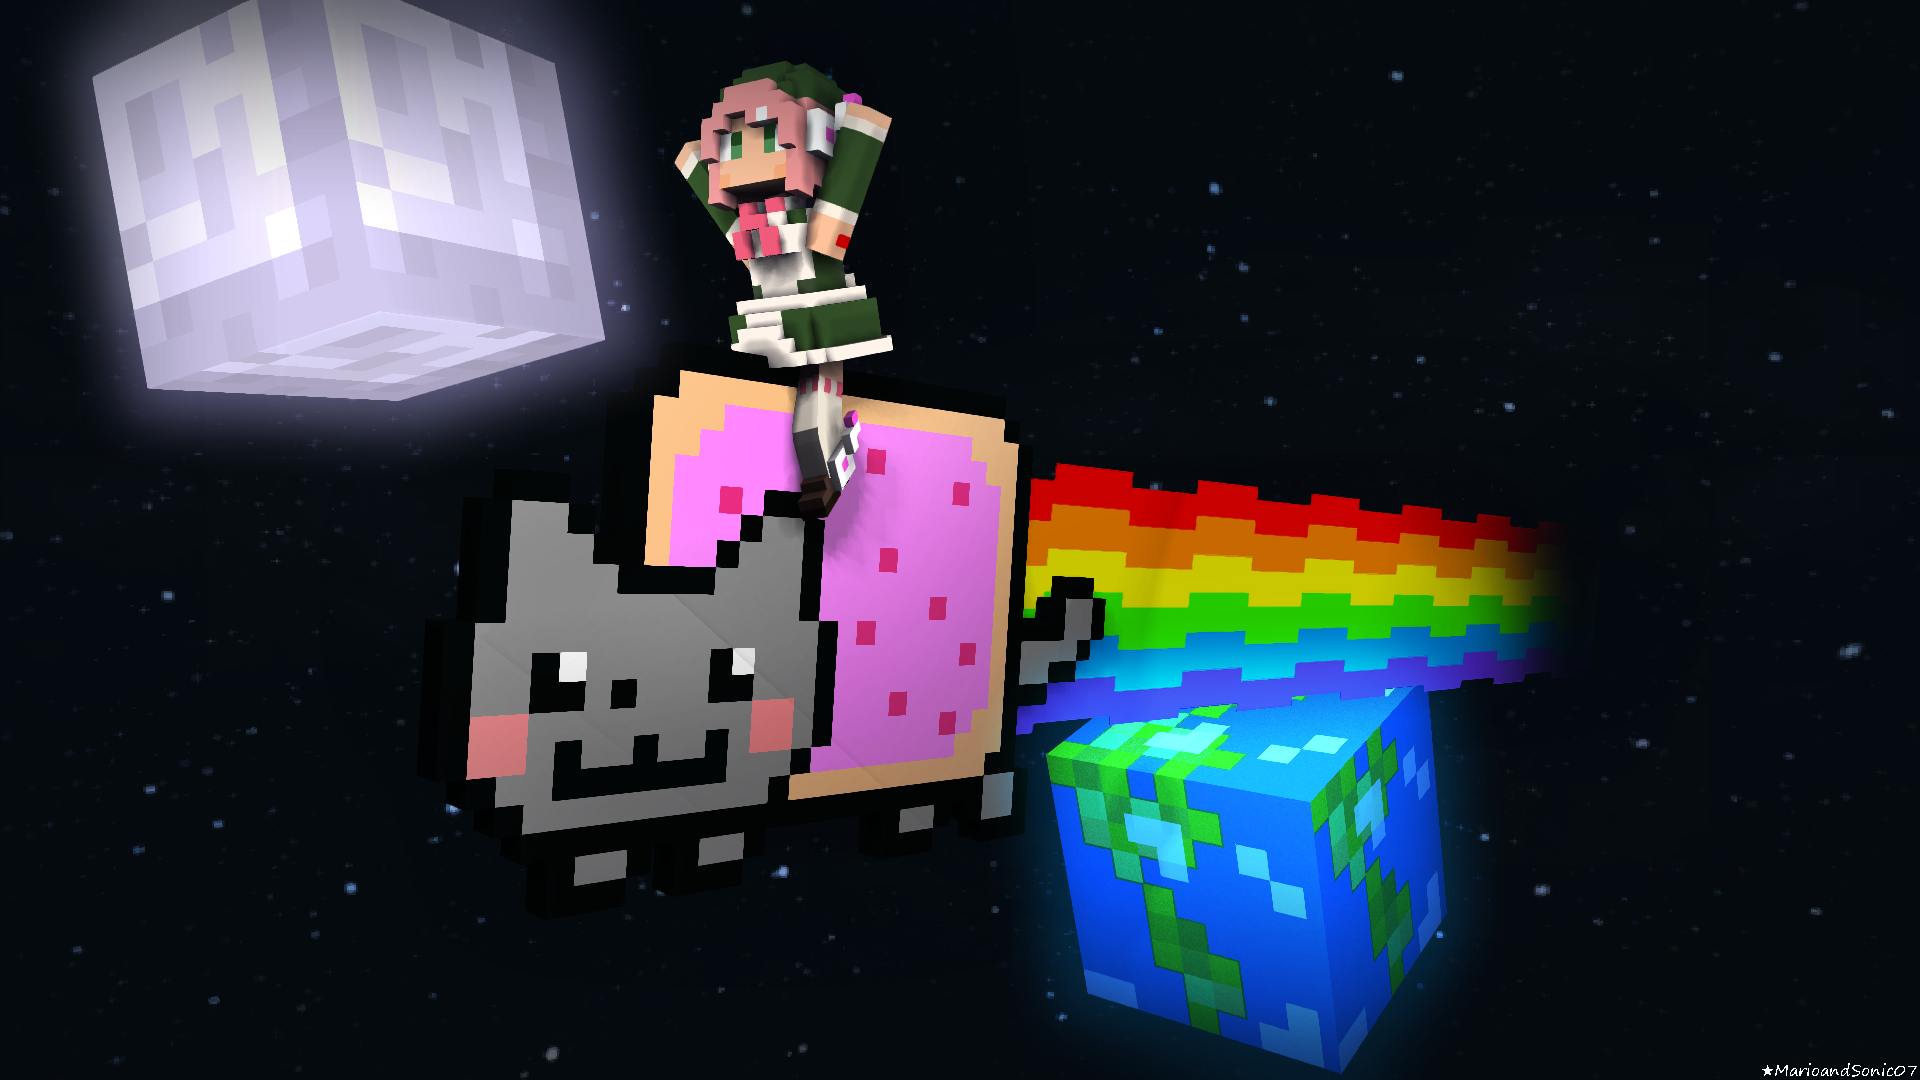 A Image of Nyan Cat - Wallpapers and art - Mine-imator forums